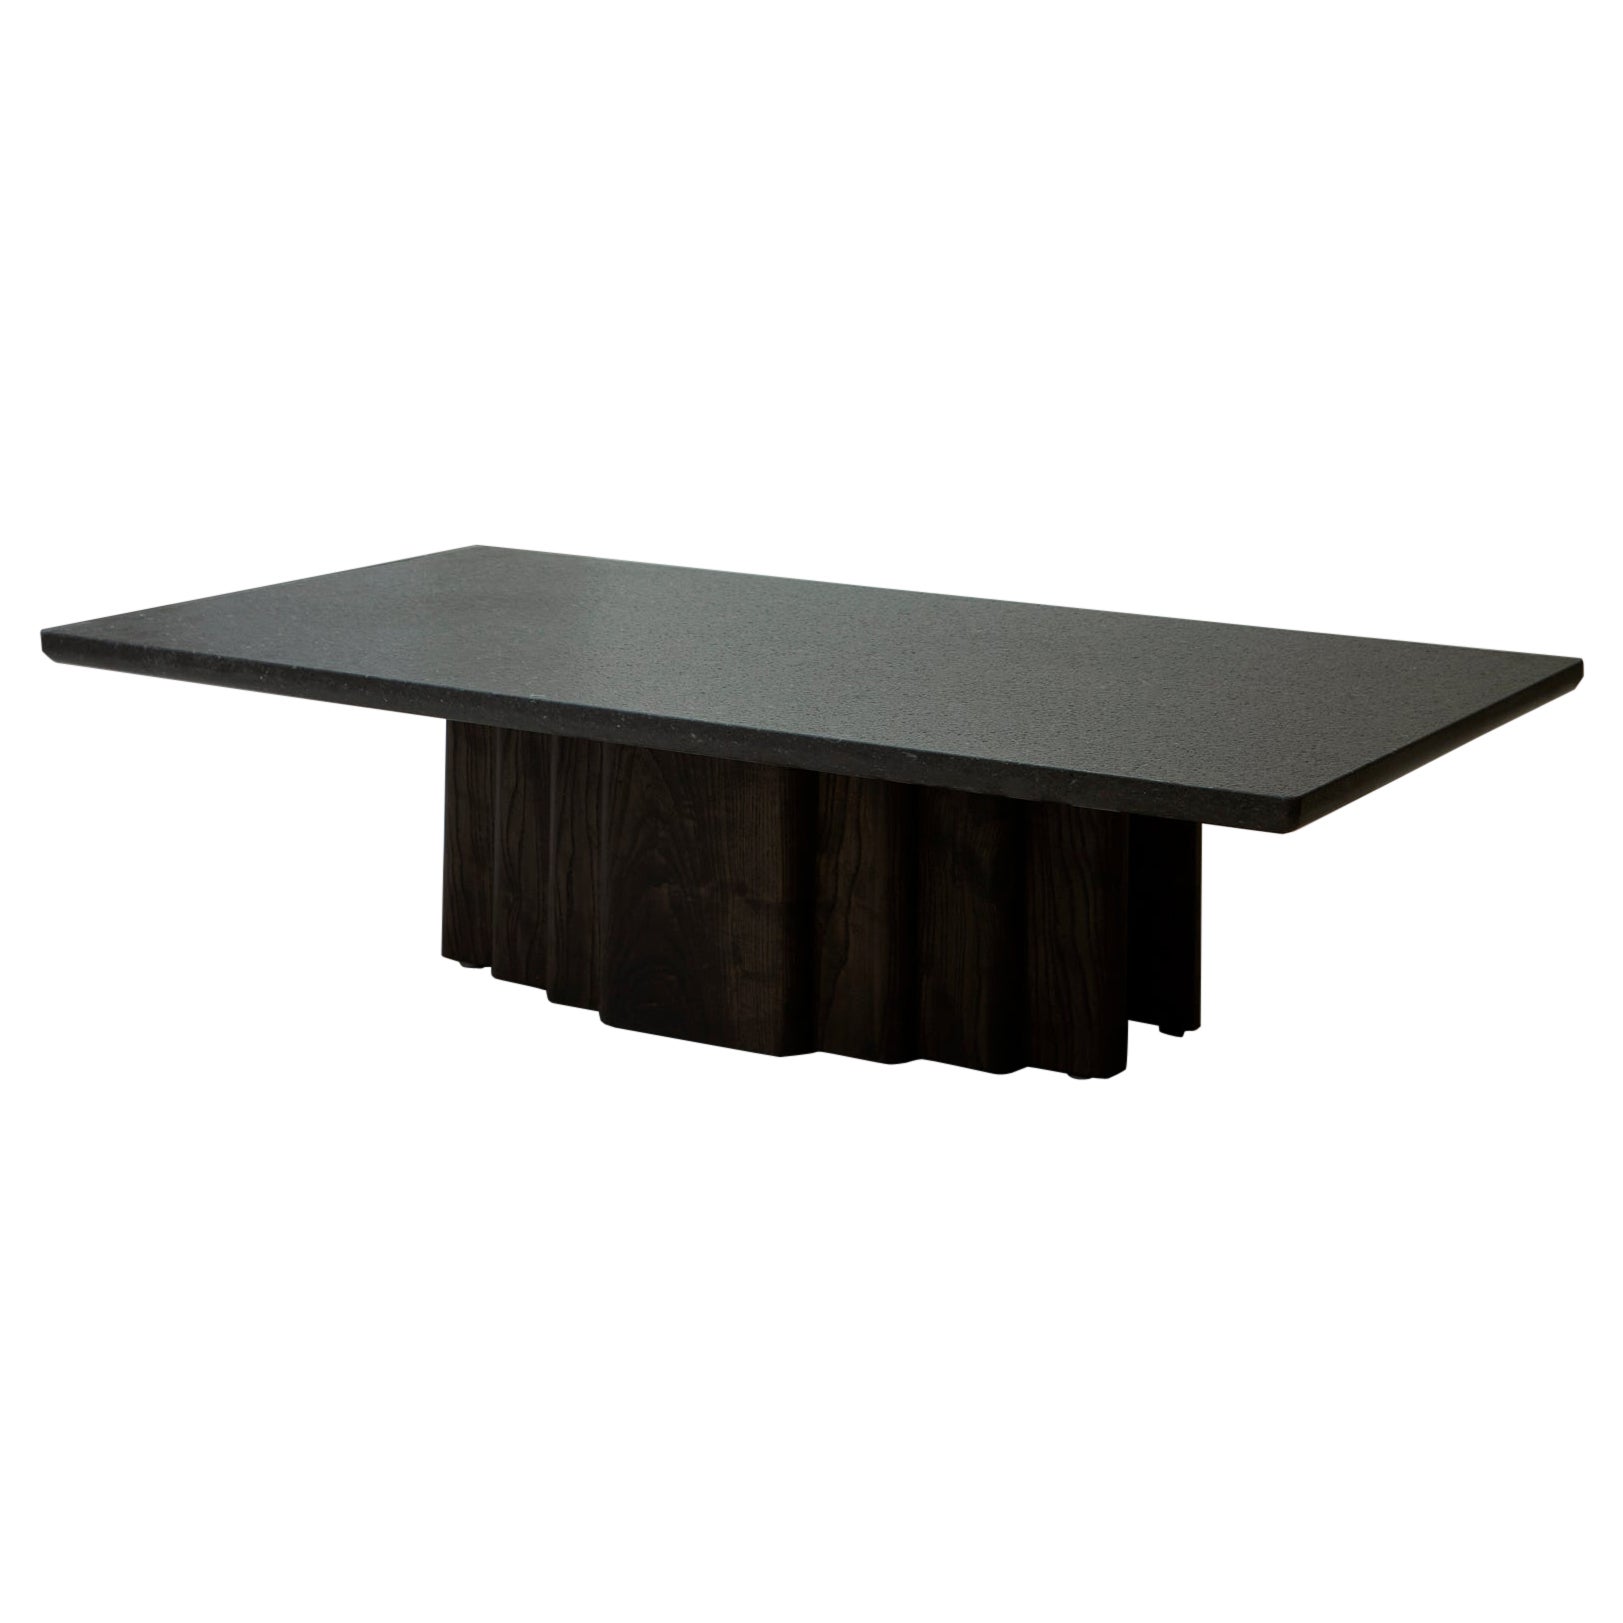 Monumental wooden Cunic coffee table